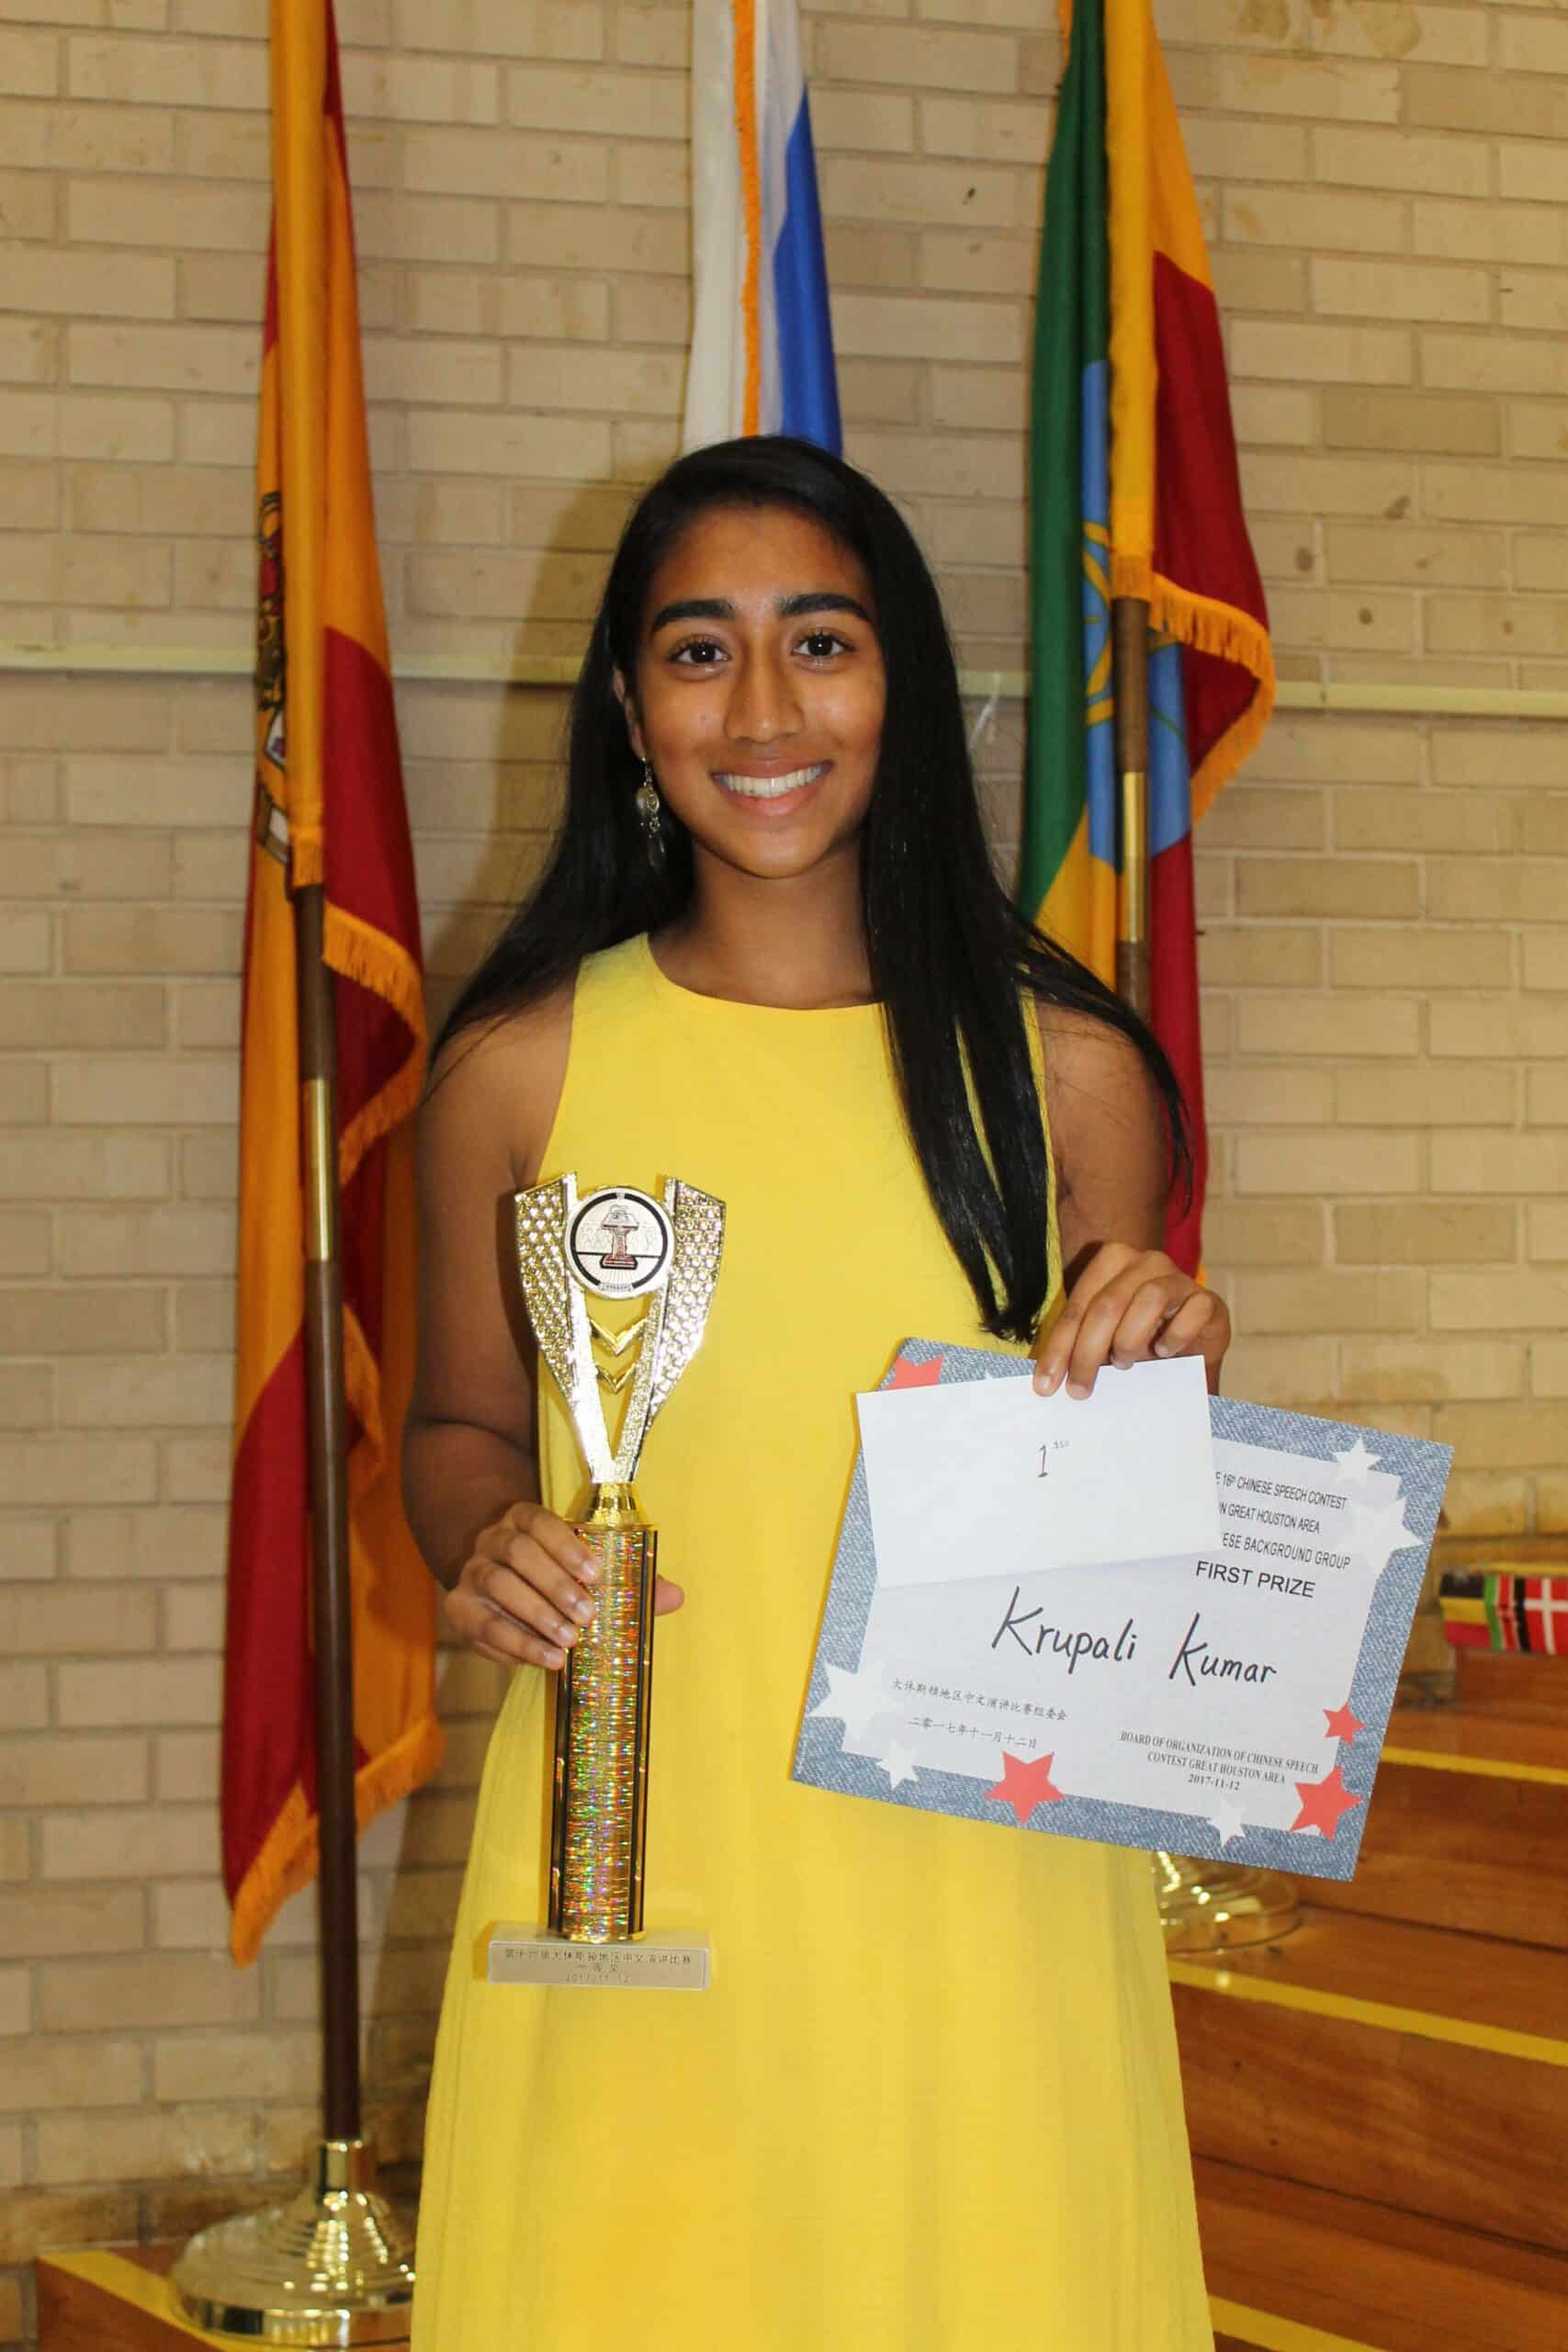 Krupali Kumar won 1st place in Houston's Chinese Speech Competition